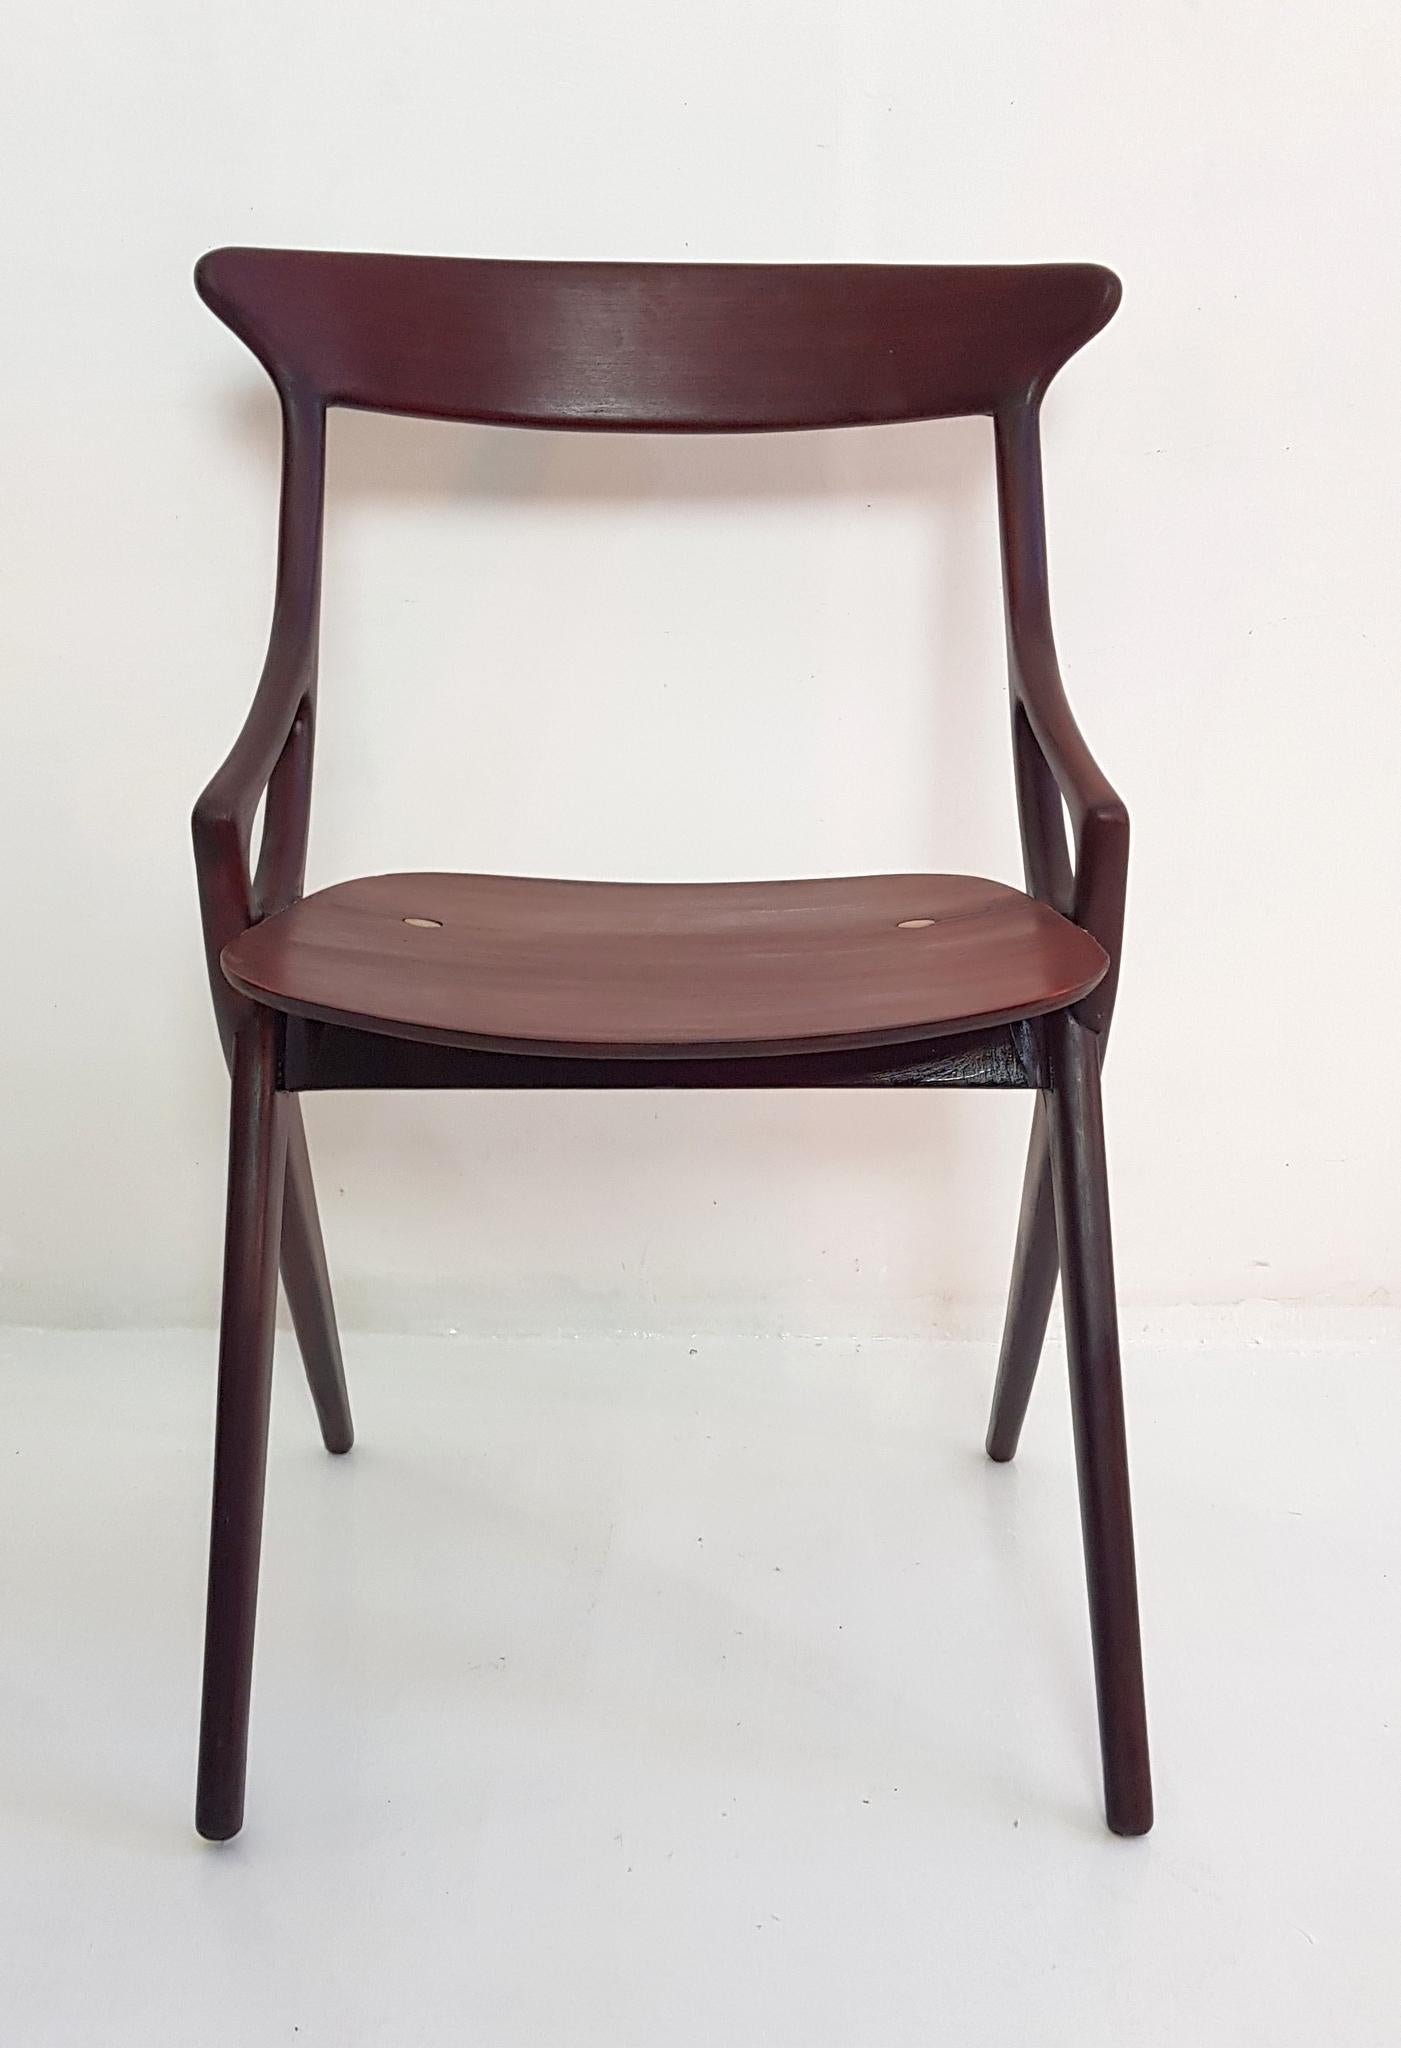 Set of 4 Dining Chairs by Arne Hovmand Olsen for Mogens Kold Denmark 1959 In Good Condition In Albano Laziale, Rome/Lazio